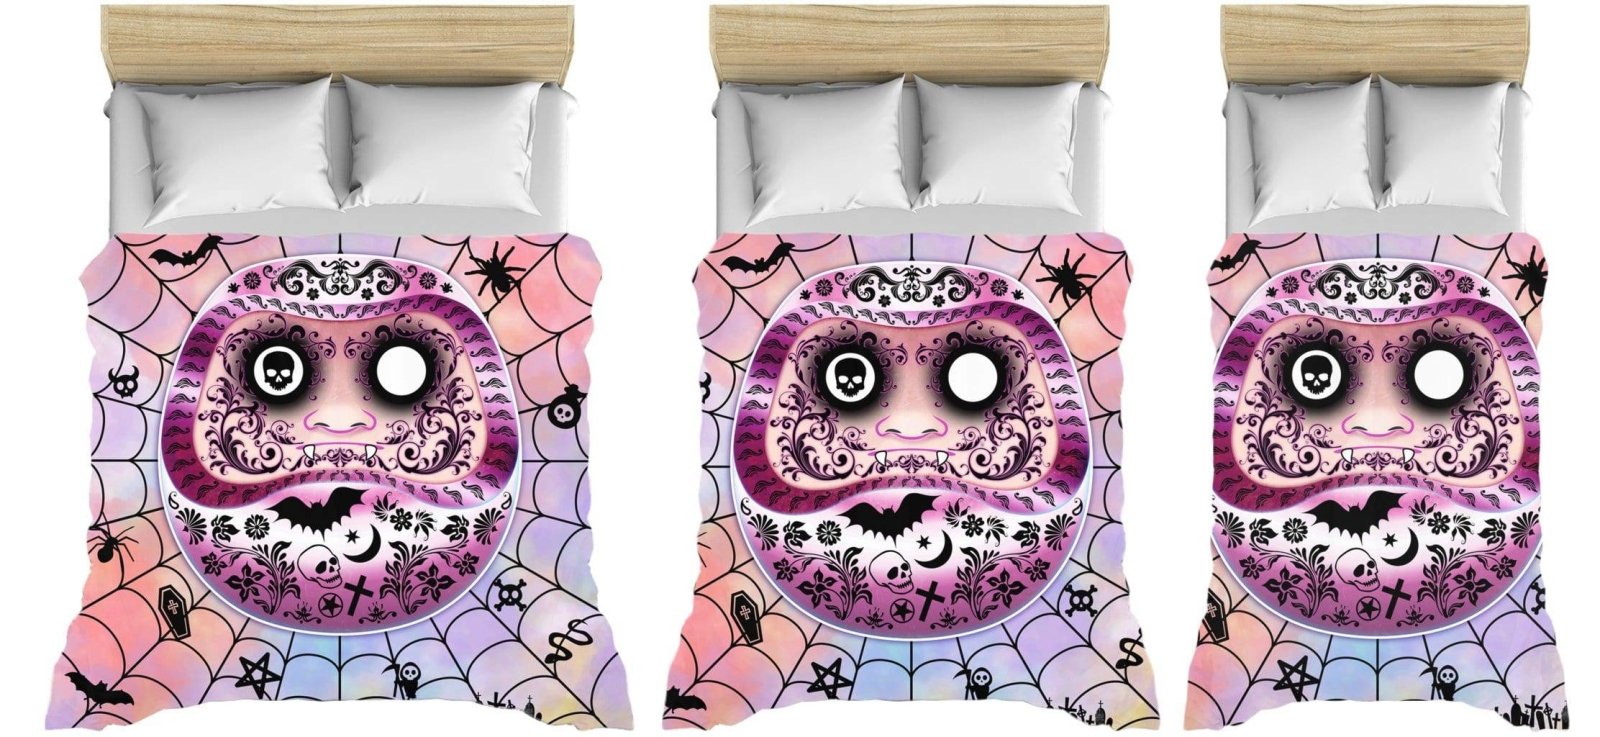 Daruma Bedding Set, Comforter and Duvet, Funny Japanese Pastel Goth Bed Cover and Bedroom Decor, King, Queen and Twin Size - Japanese Art - Abysm Internal